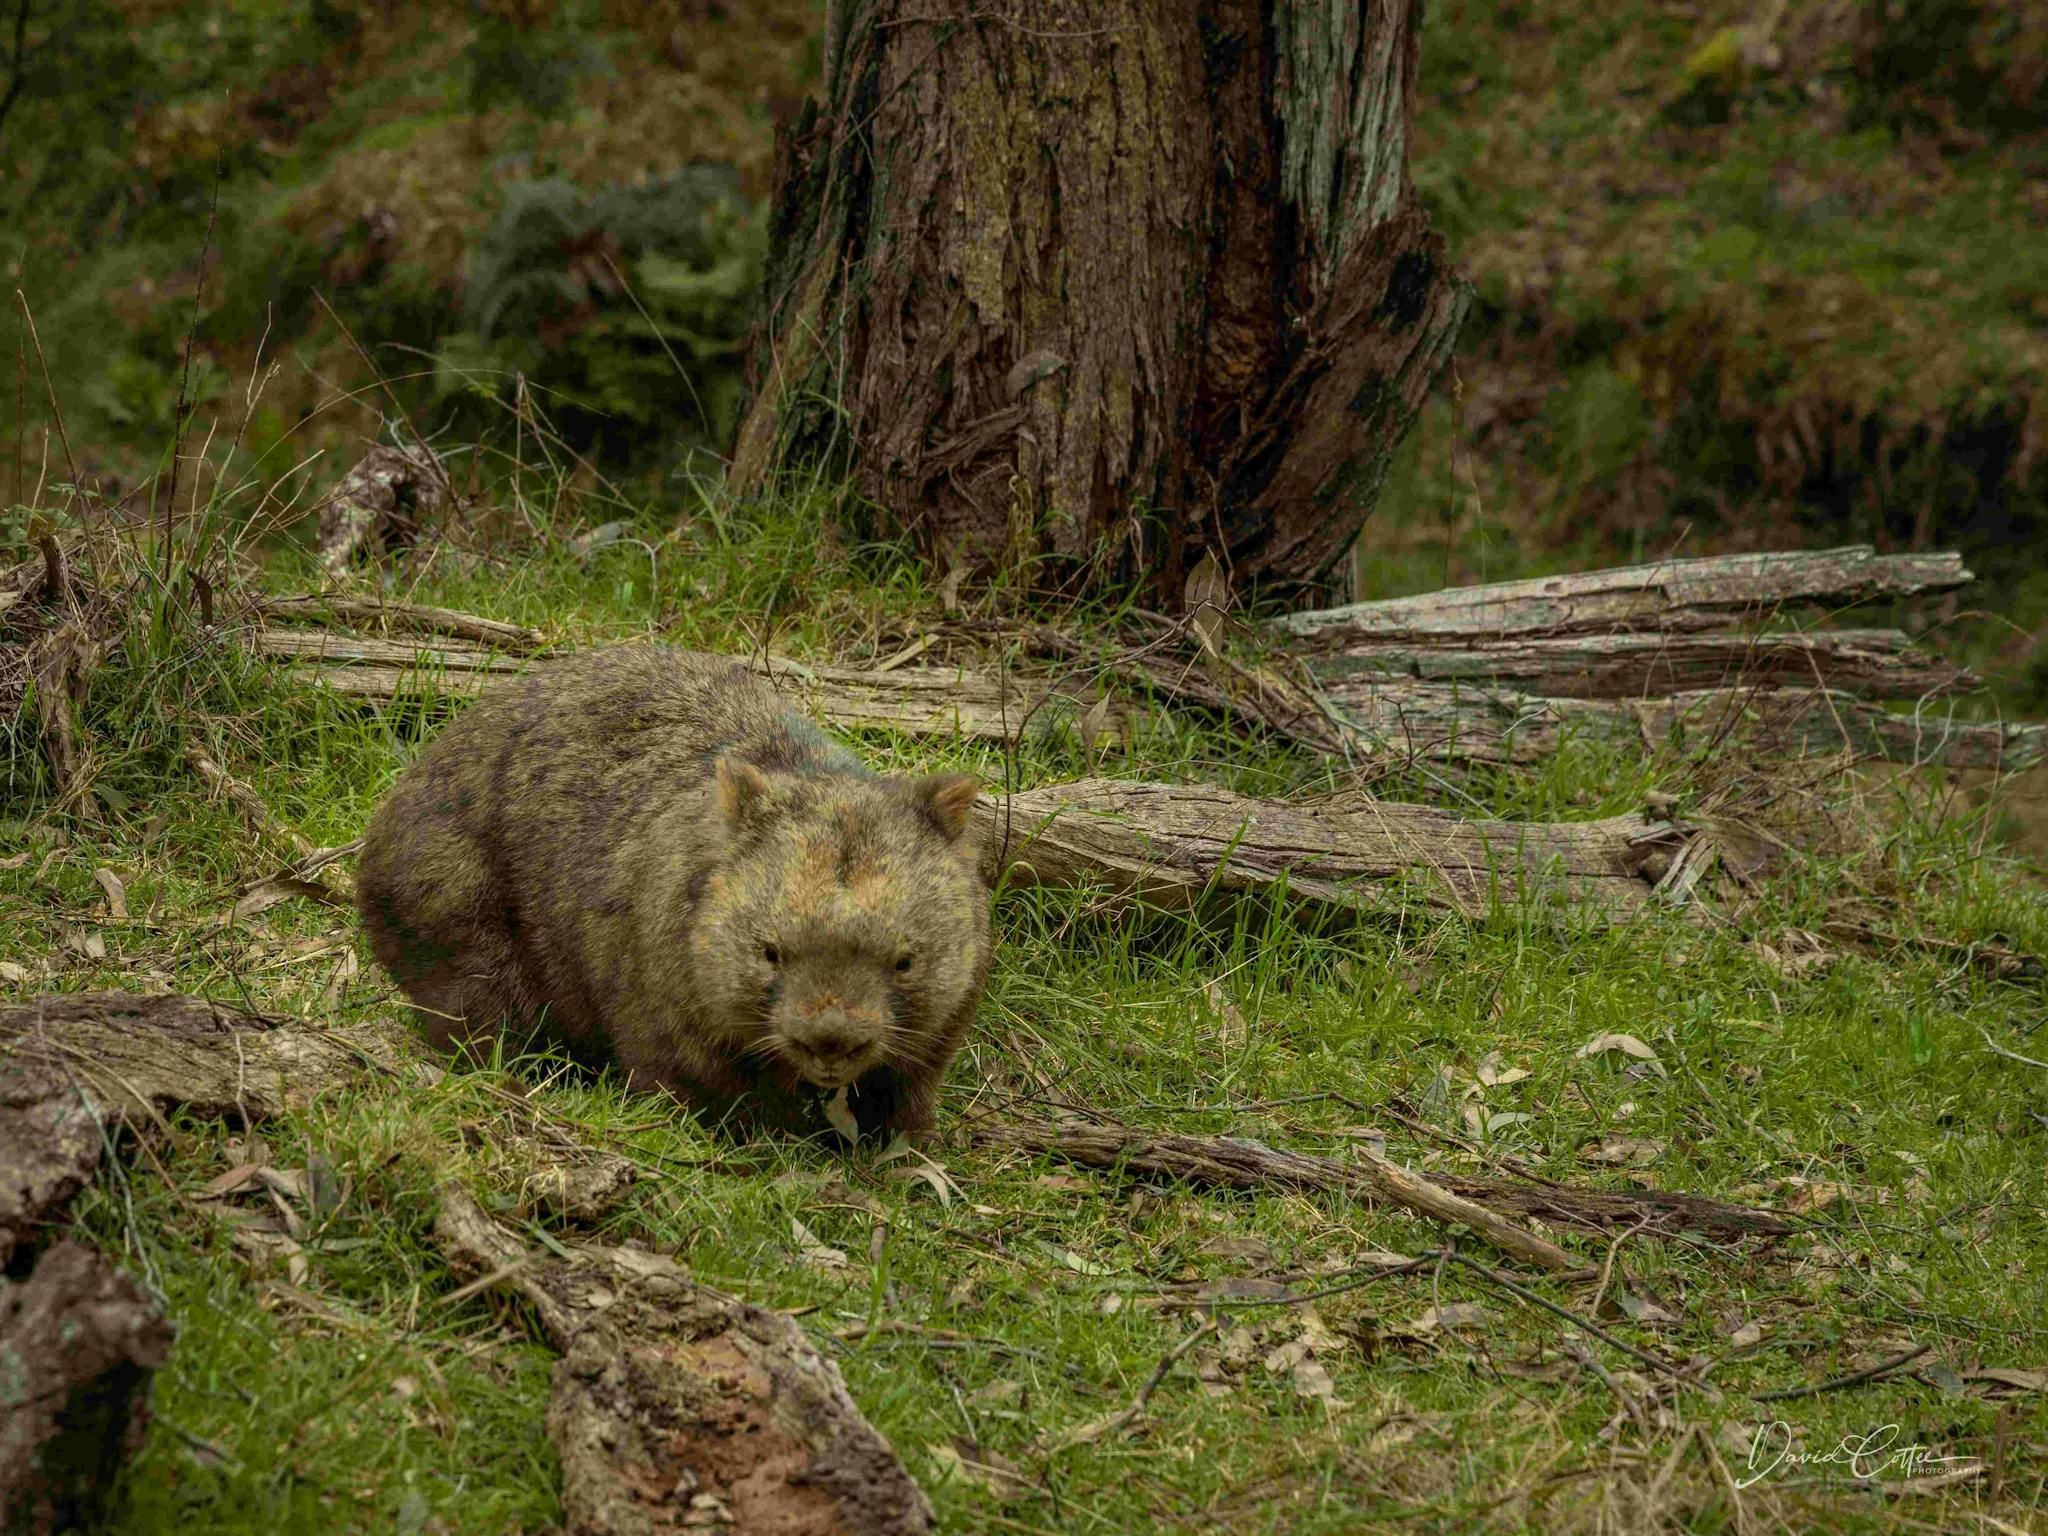 A wombat on the track to Granya Falls